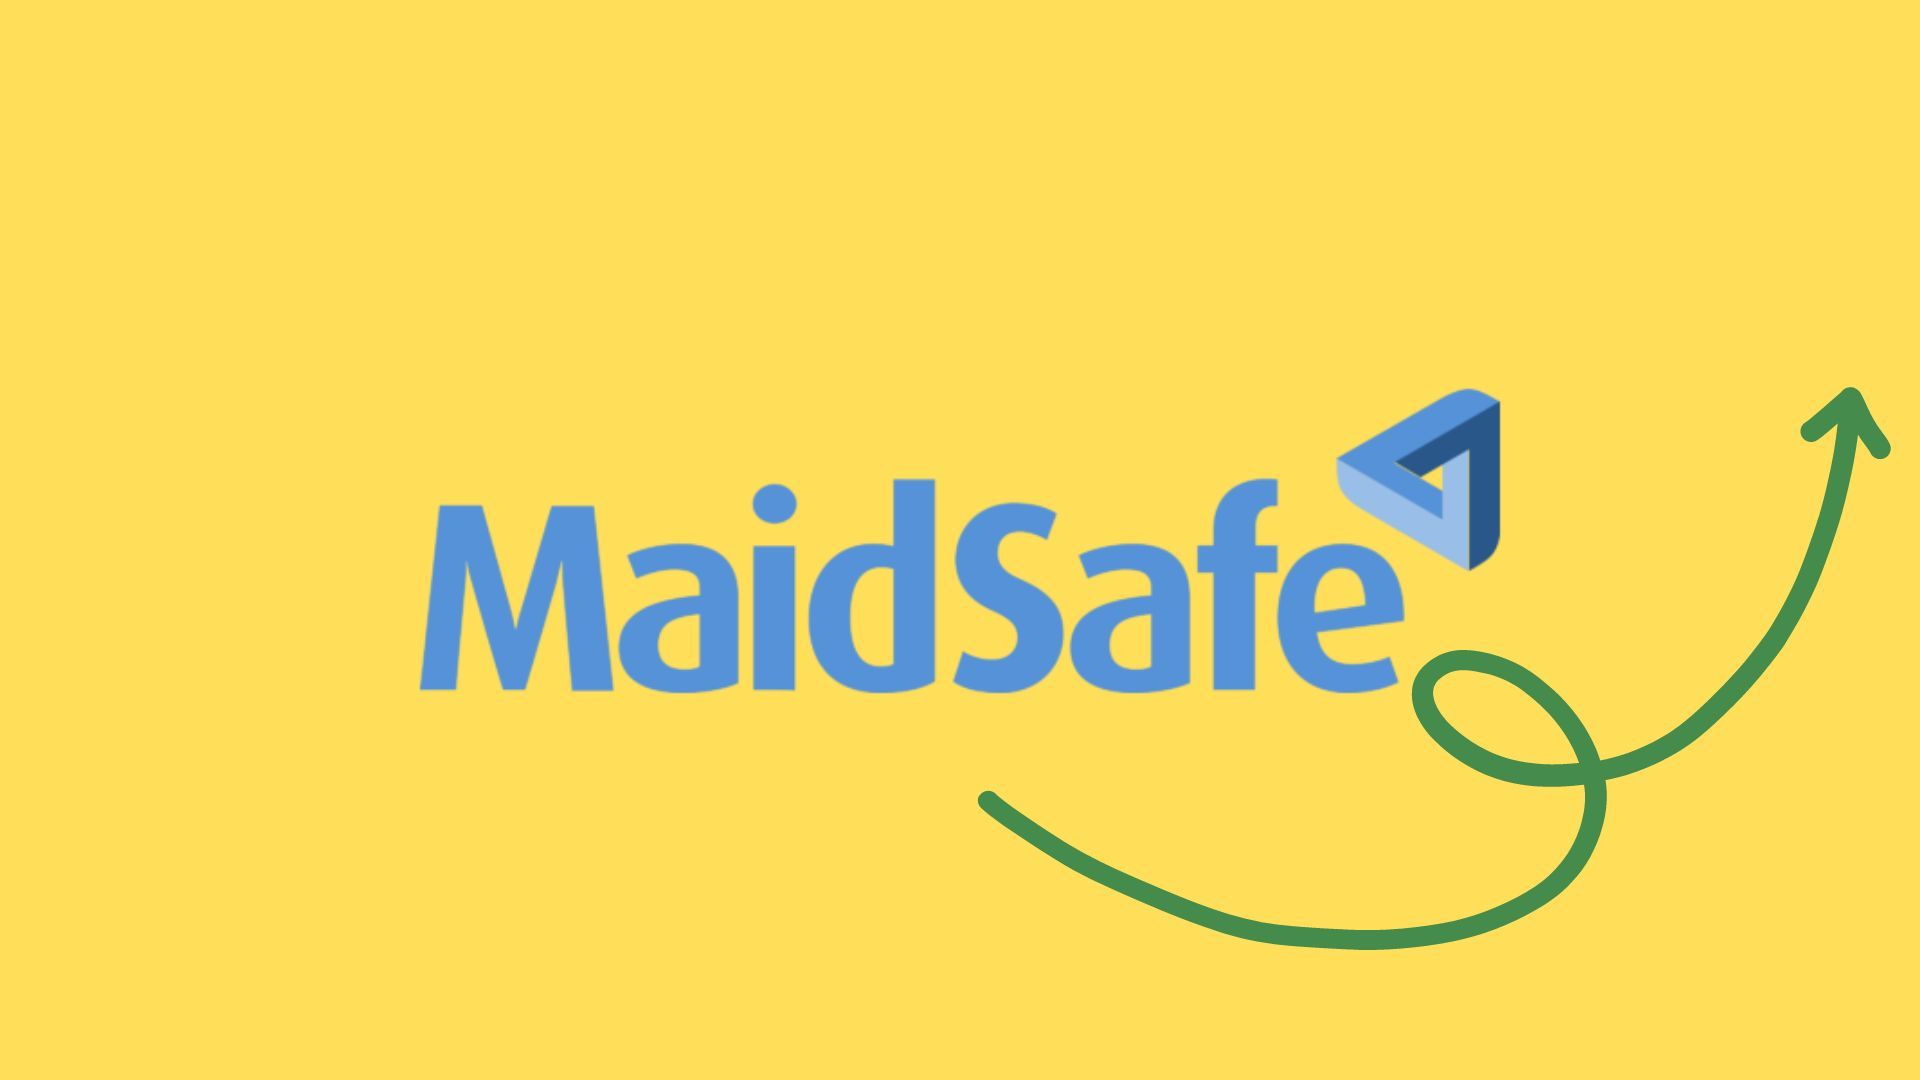 Blue MaidSafe logo, yellow background and a green twirled arrow pointing up.